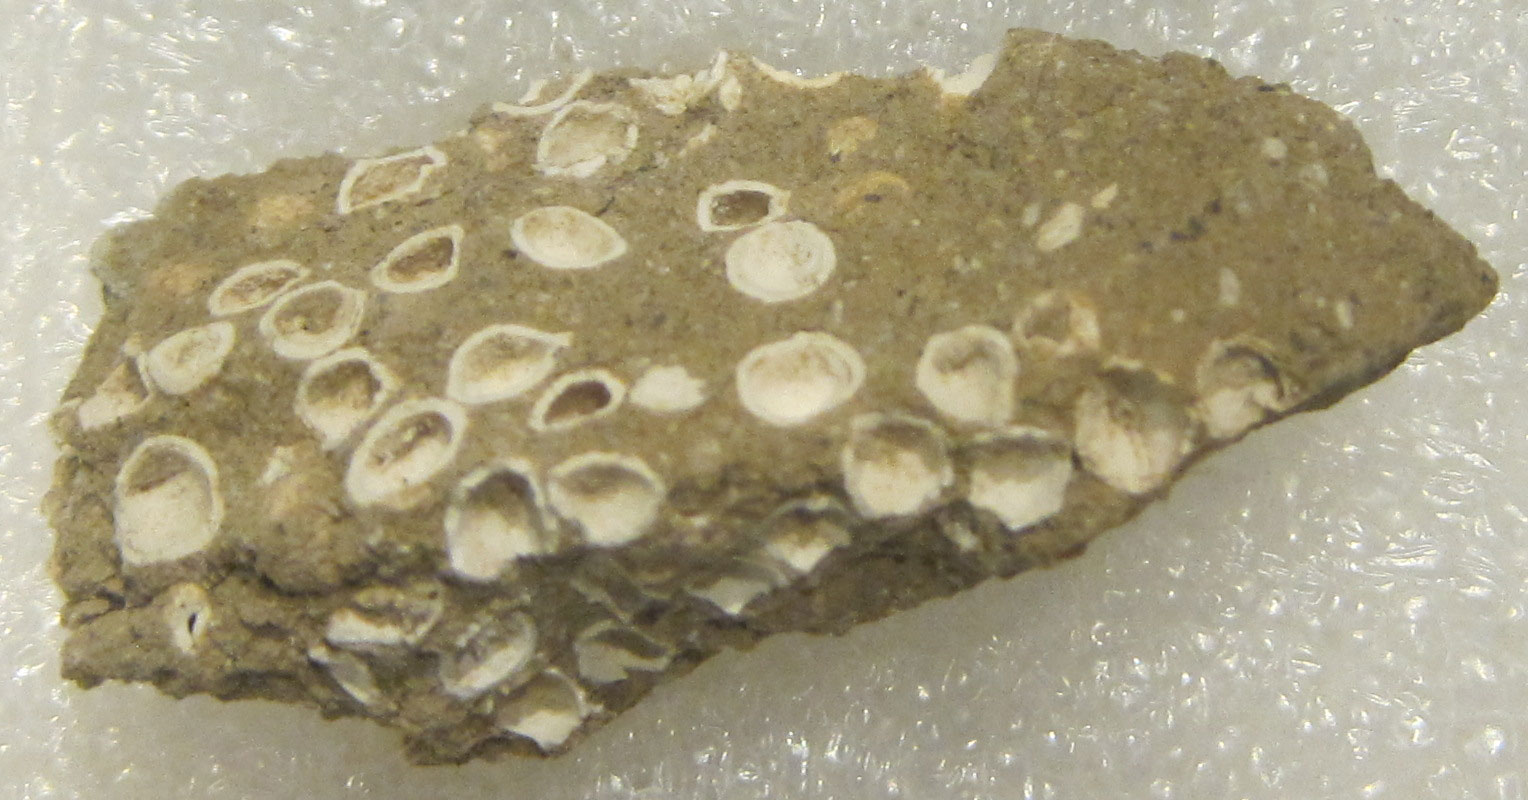 Photograph of a chunk of brown rock with white hackberry seeds embedded in it from the Miocene Mascall Formation. The seeds are oval-shaped and many are broken open, showing hollow interiors.